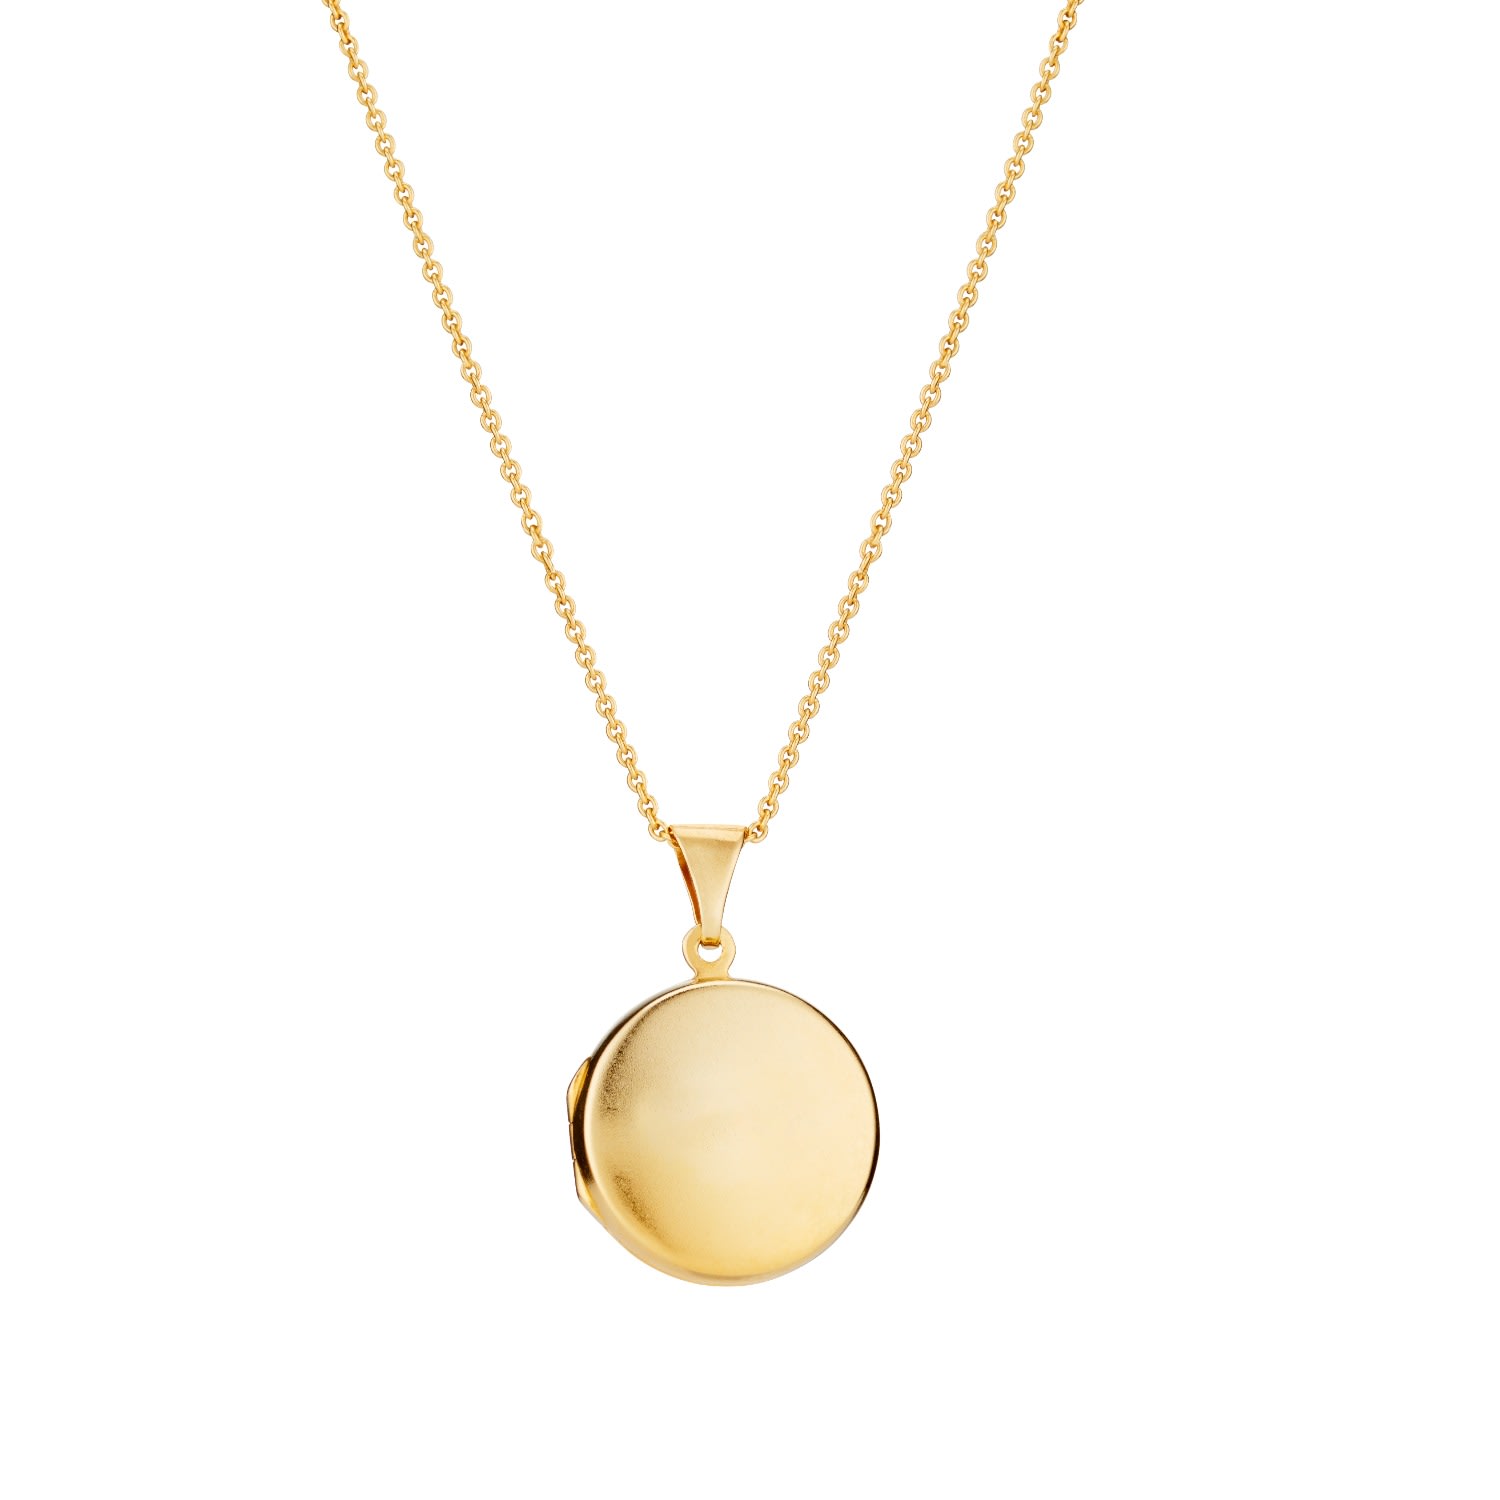 Women’s Yellow Gold Plated Small Round Locket Necklace Posh Totty Designs